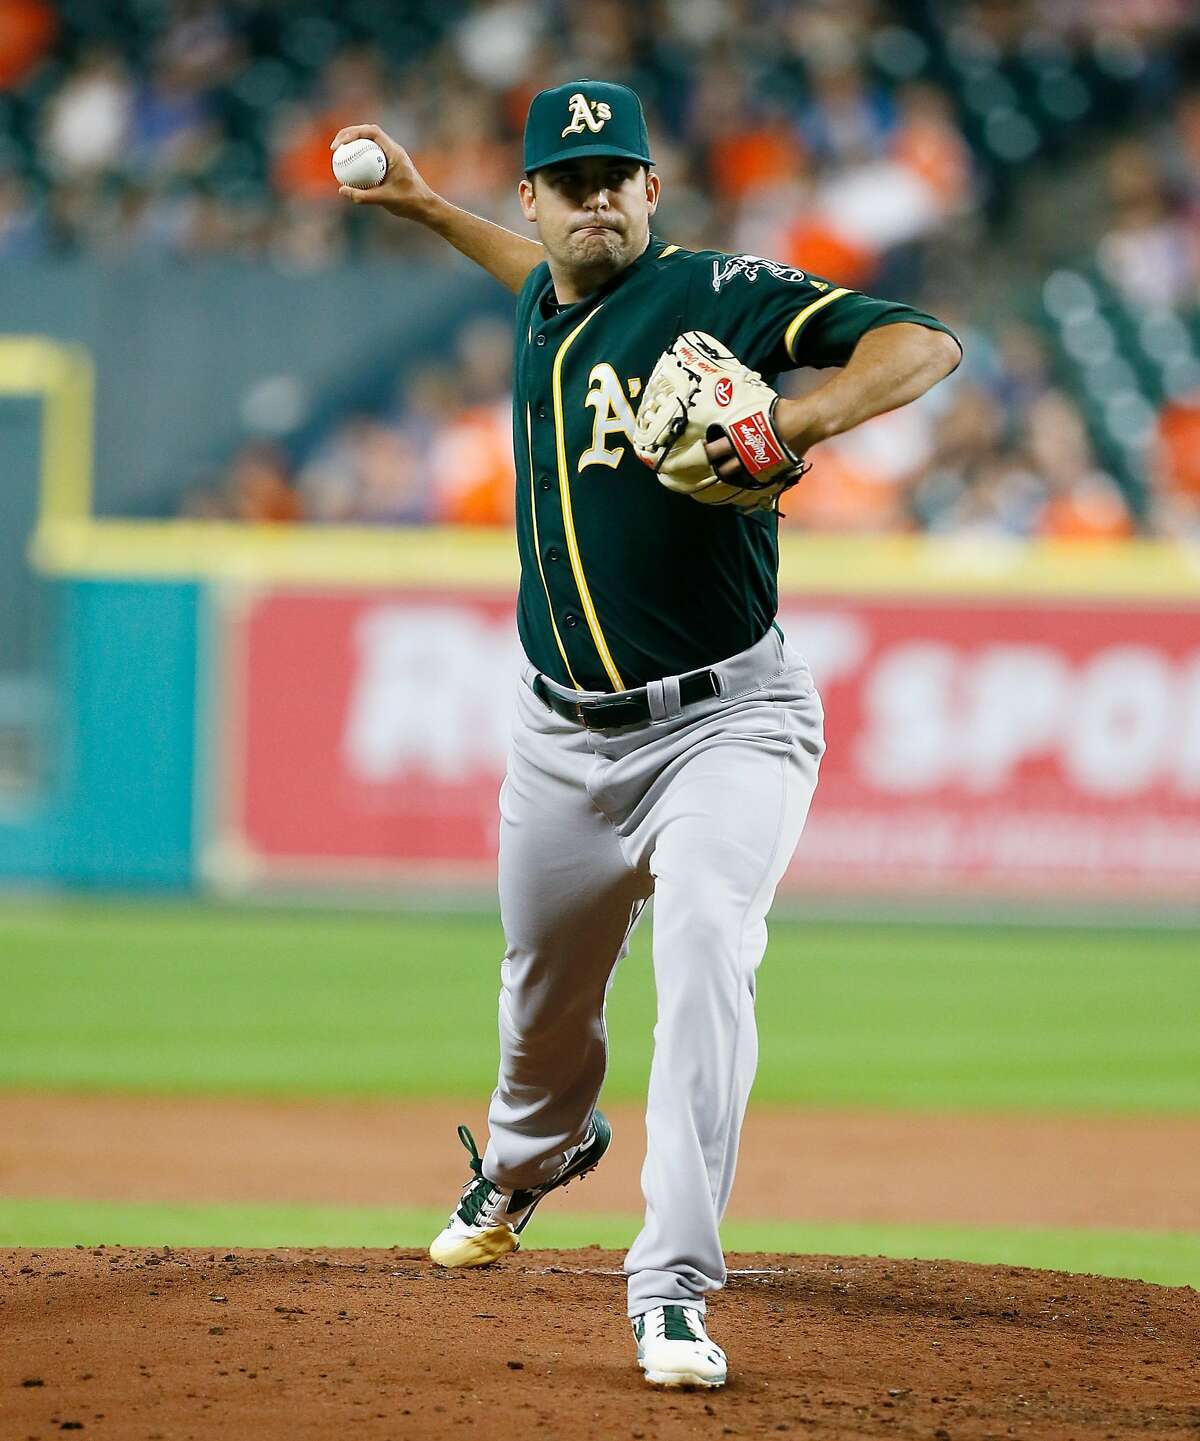 HOUSTON, TX - JUNE 03: Andrew Triggs #60 of the Oakland Athletics pitches in the first inning against the Houston Astros at Minute Maid Park on June 3, 2016 in Houston, Texas. (Photo by Bob Levey/Getty Images)